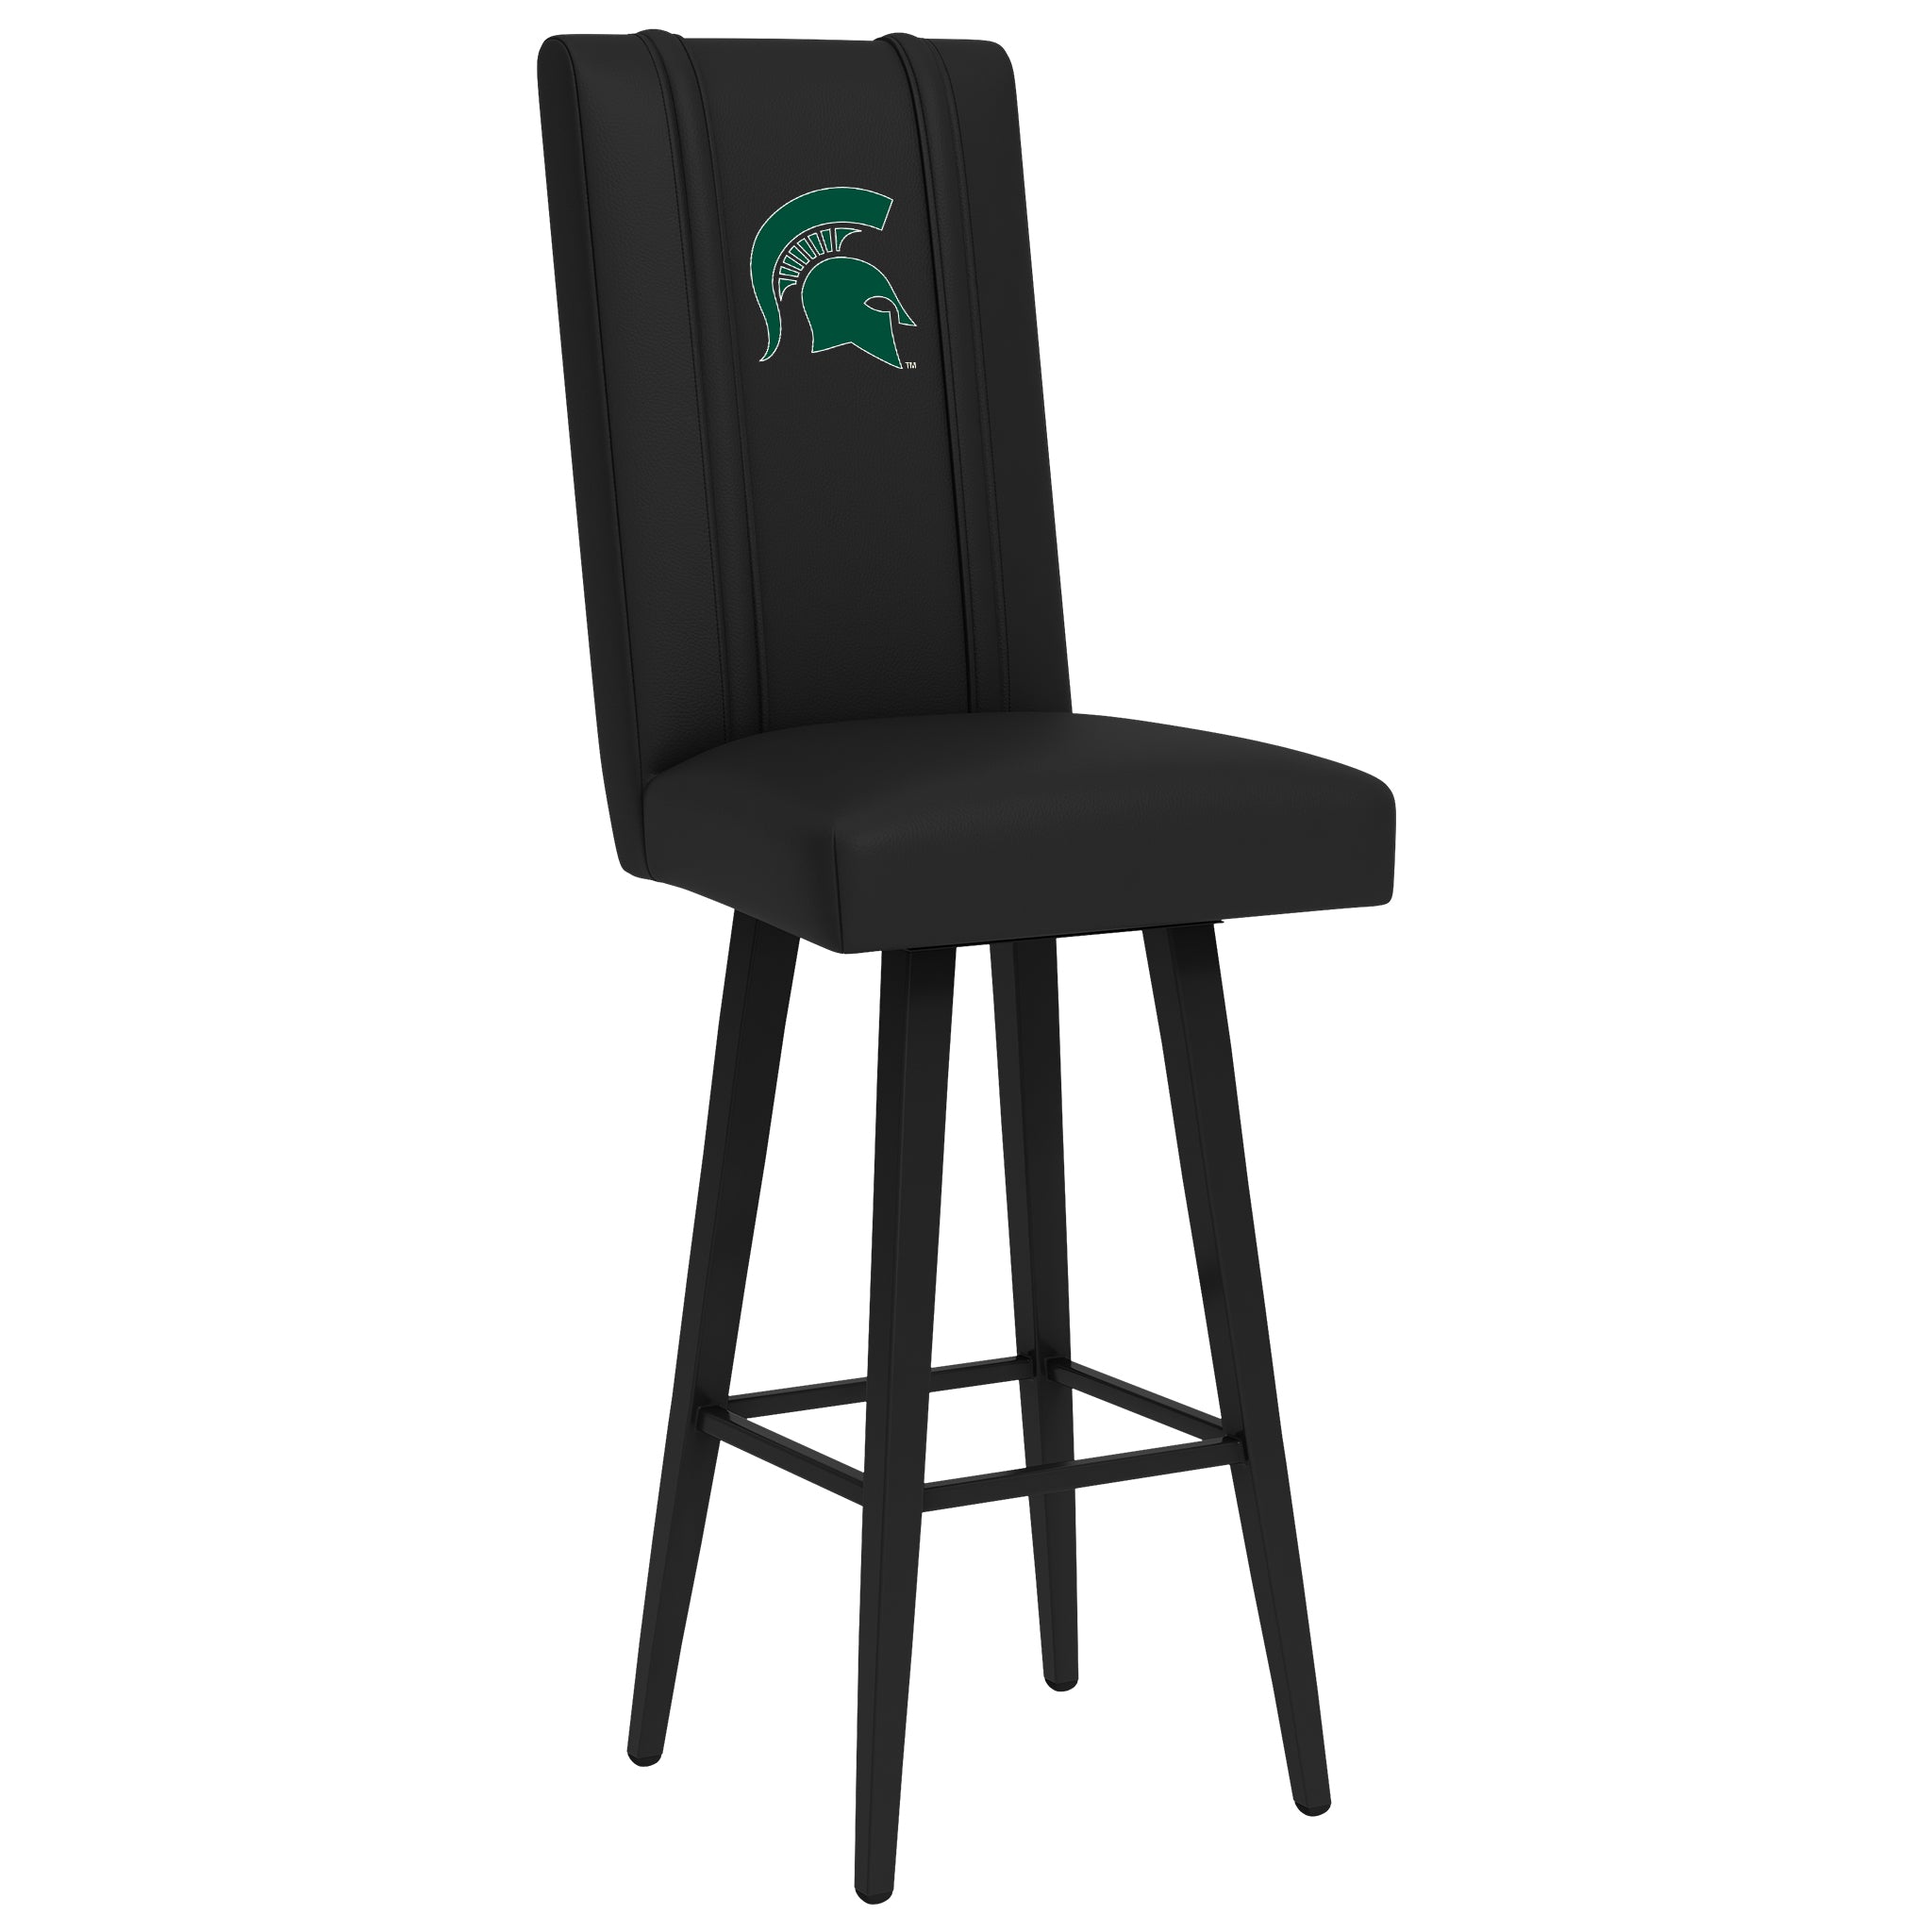 Michigan State Spartans Swivel Bar Stool 2000 With Michigan State Spartans Logo